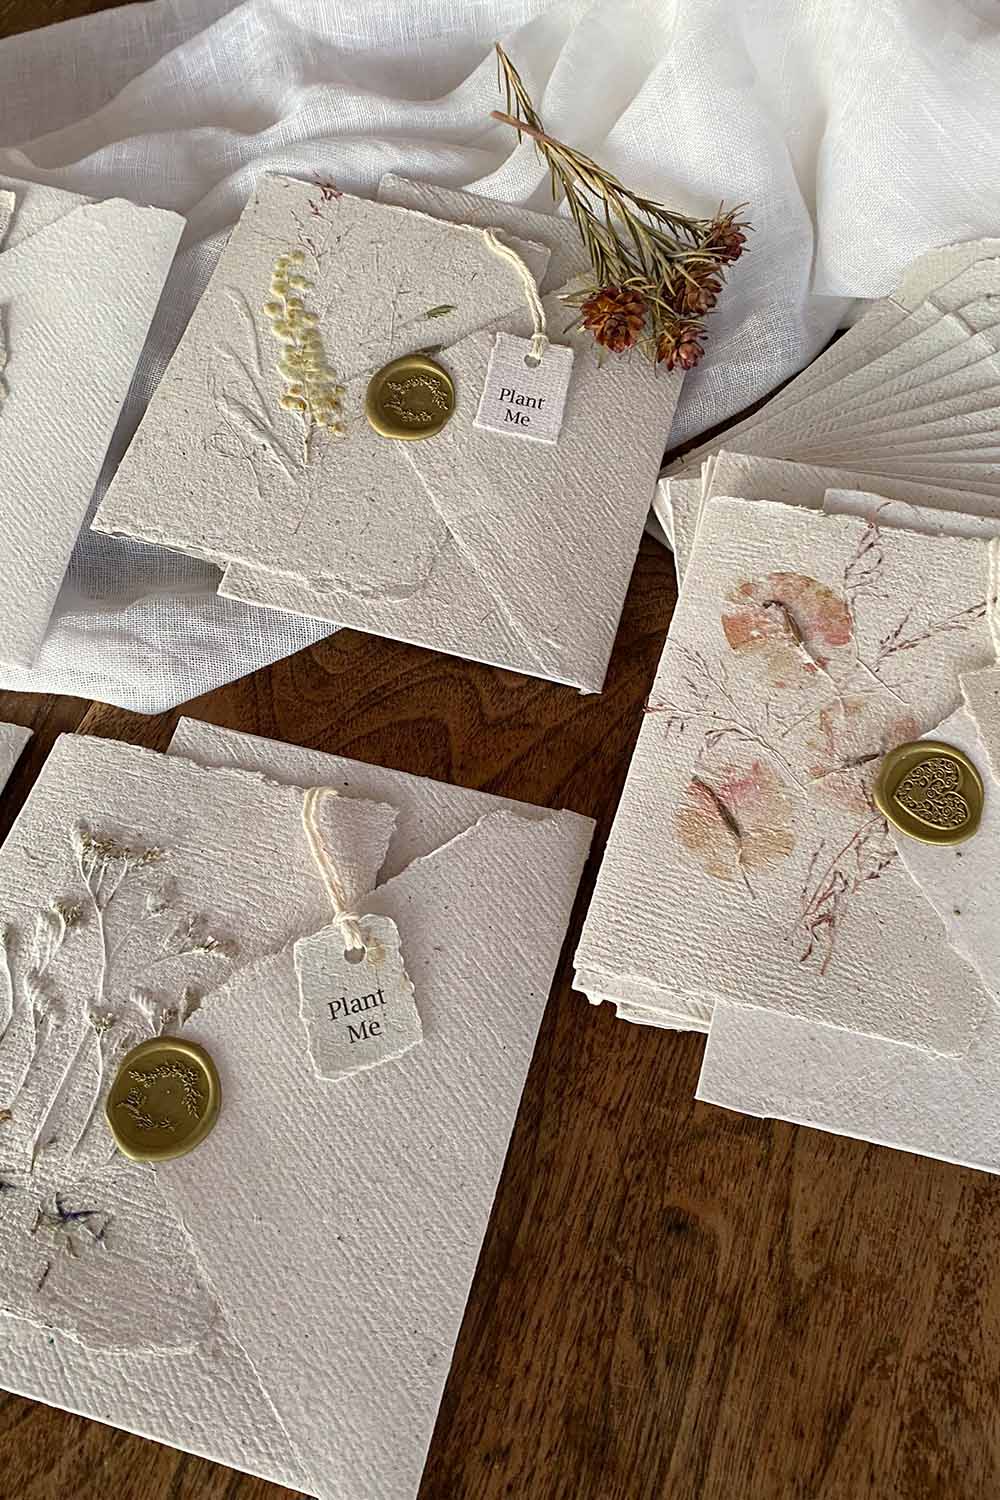 Handmade paper cards that are environmentally friendly. Beautiful and rustic flower design.